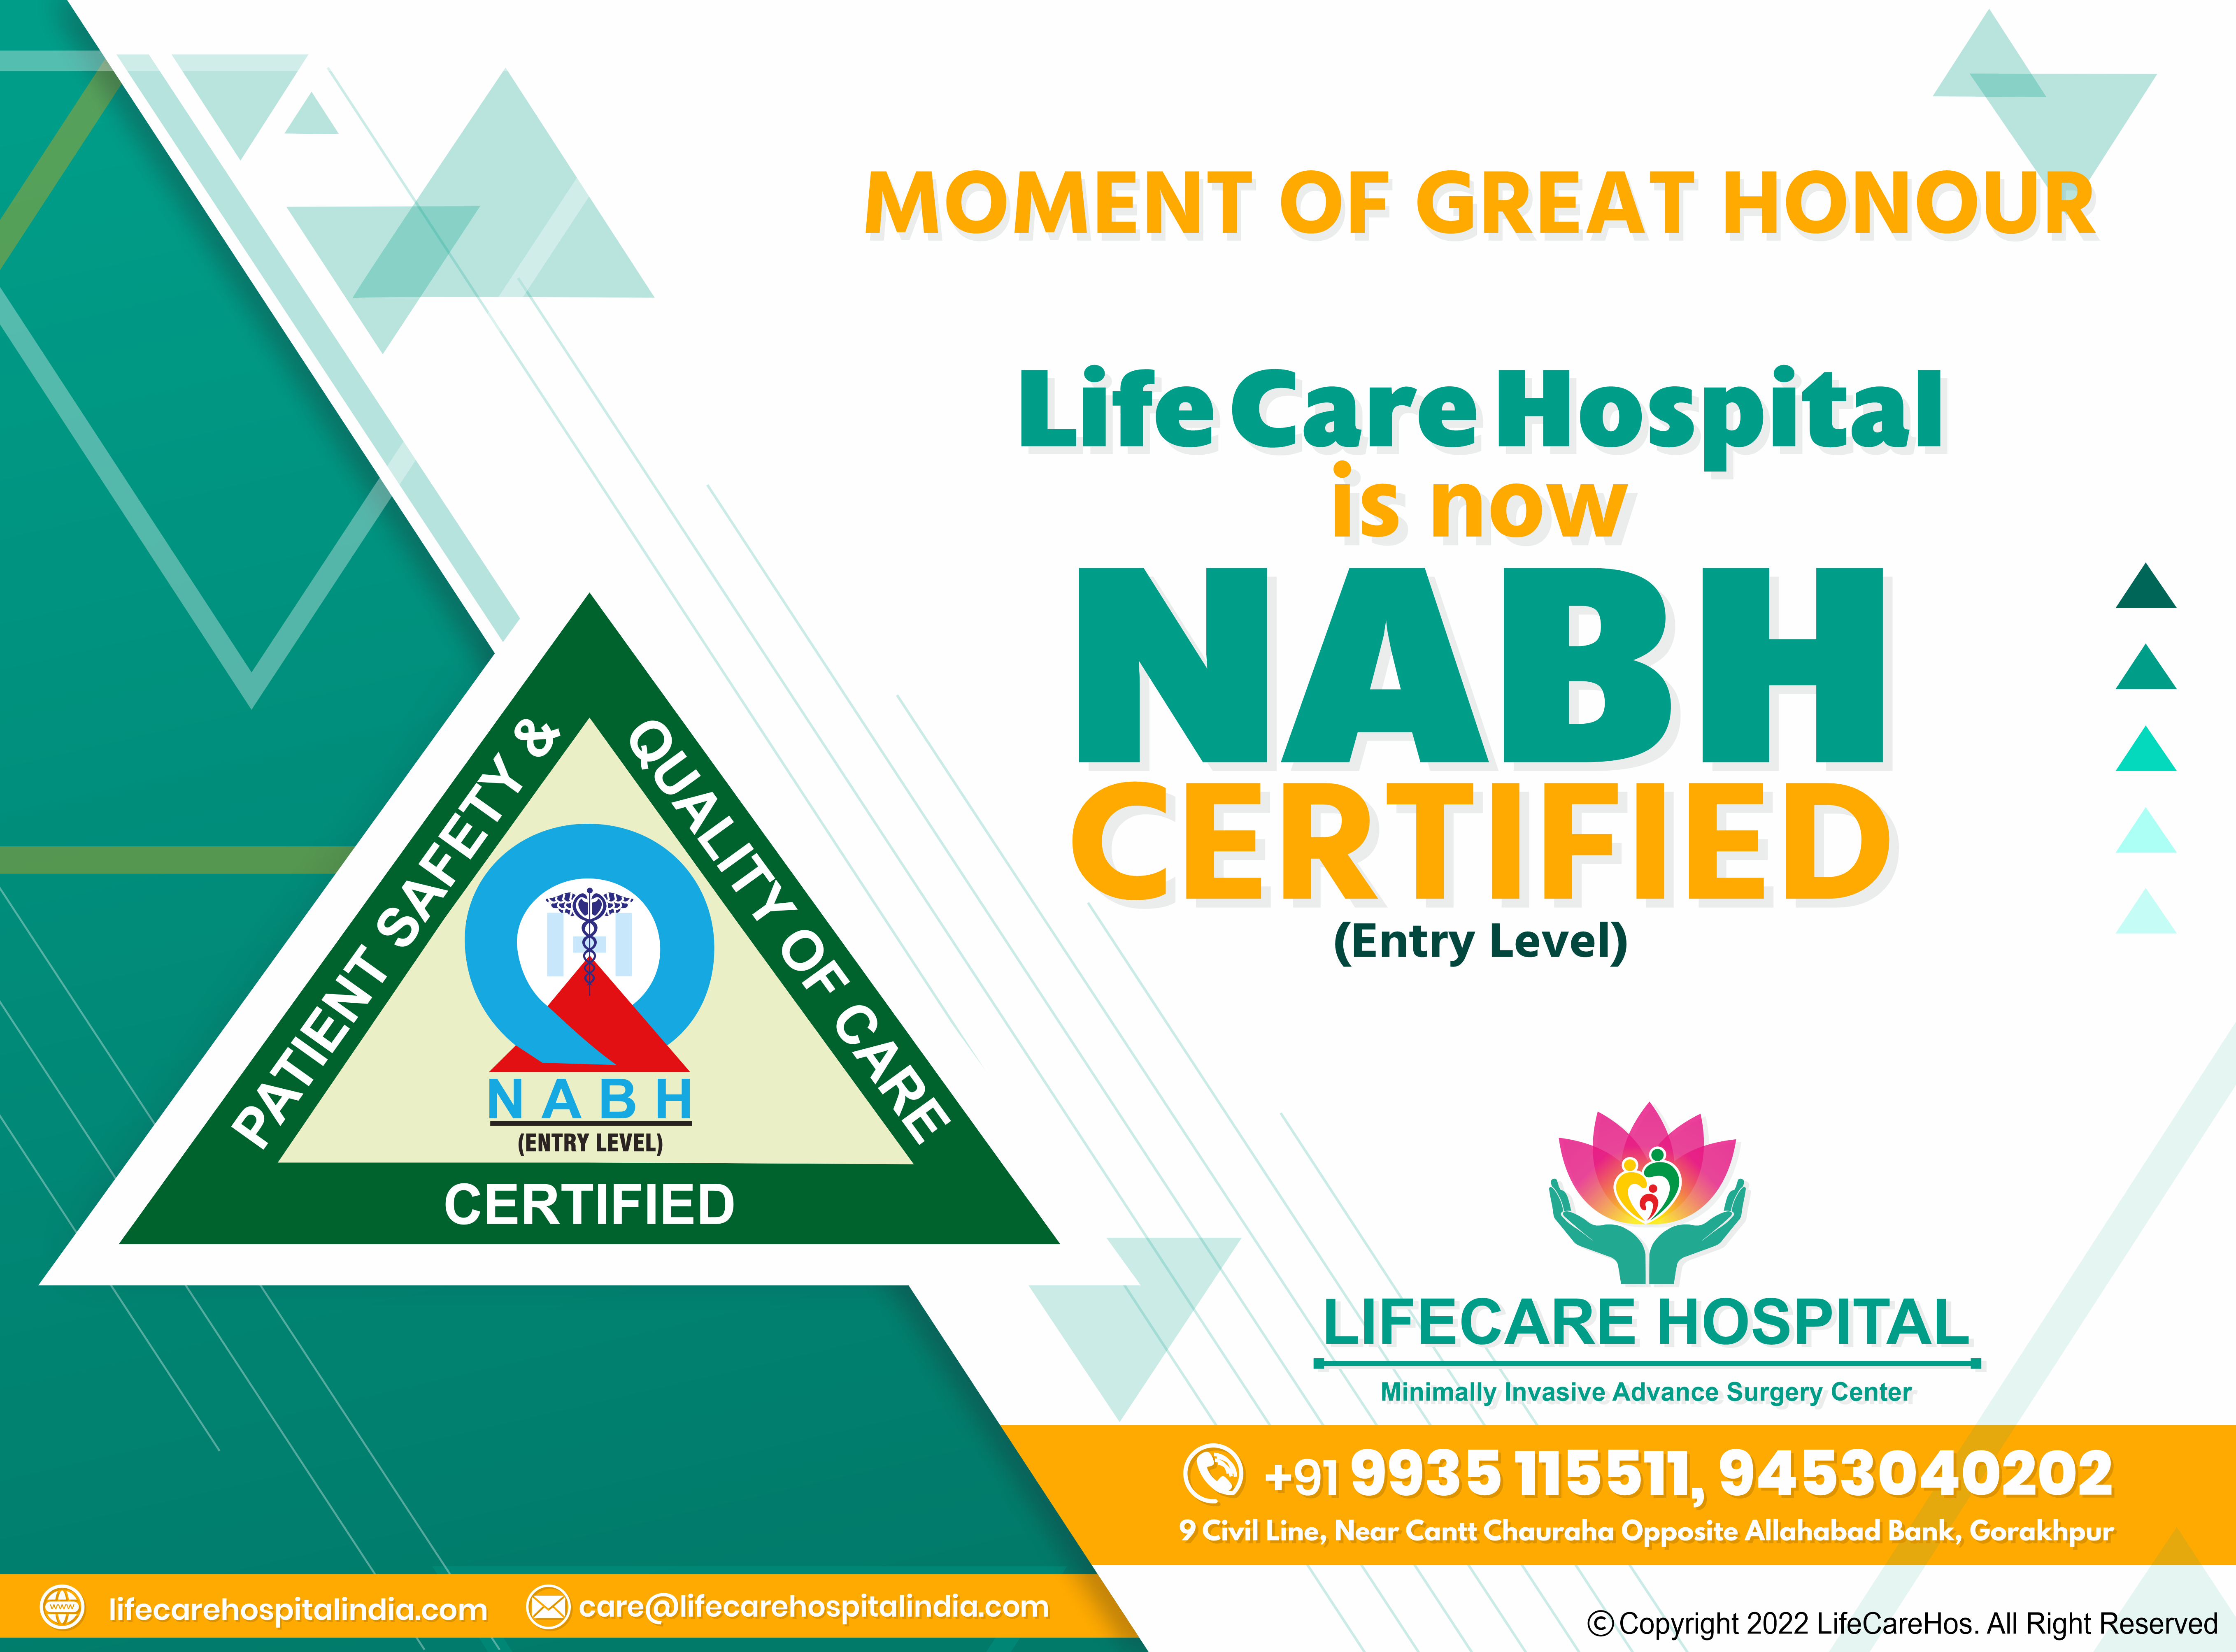 MOMENT OF GREAT HONOUR LIFECARE HOSPITAL Is Now NABH CERTIFIED (Entry Level) Hospital